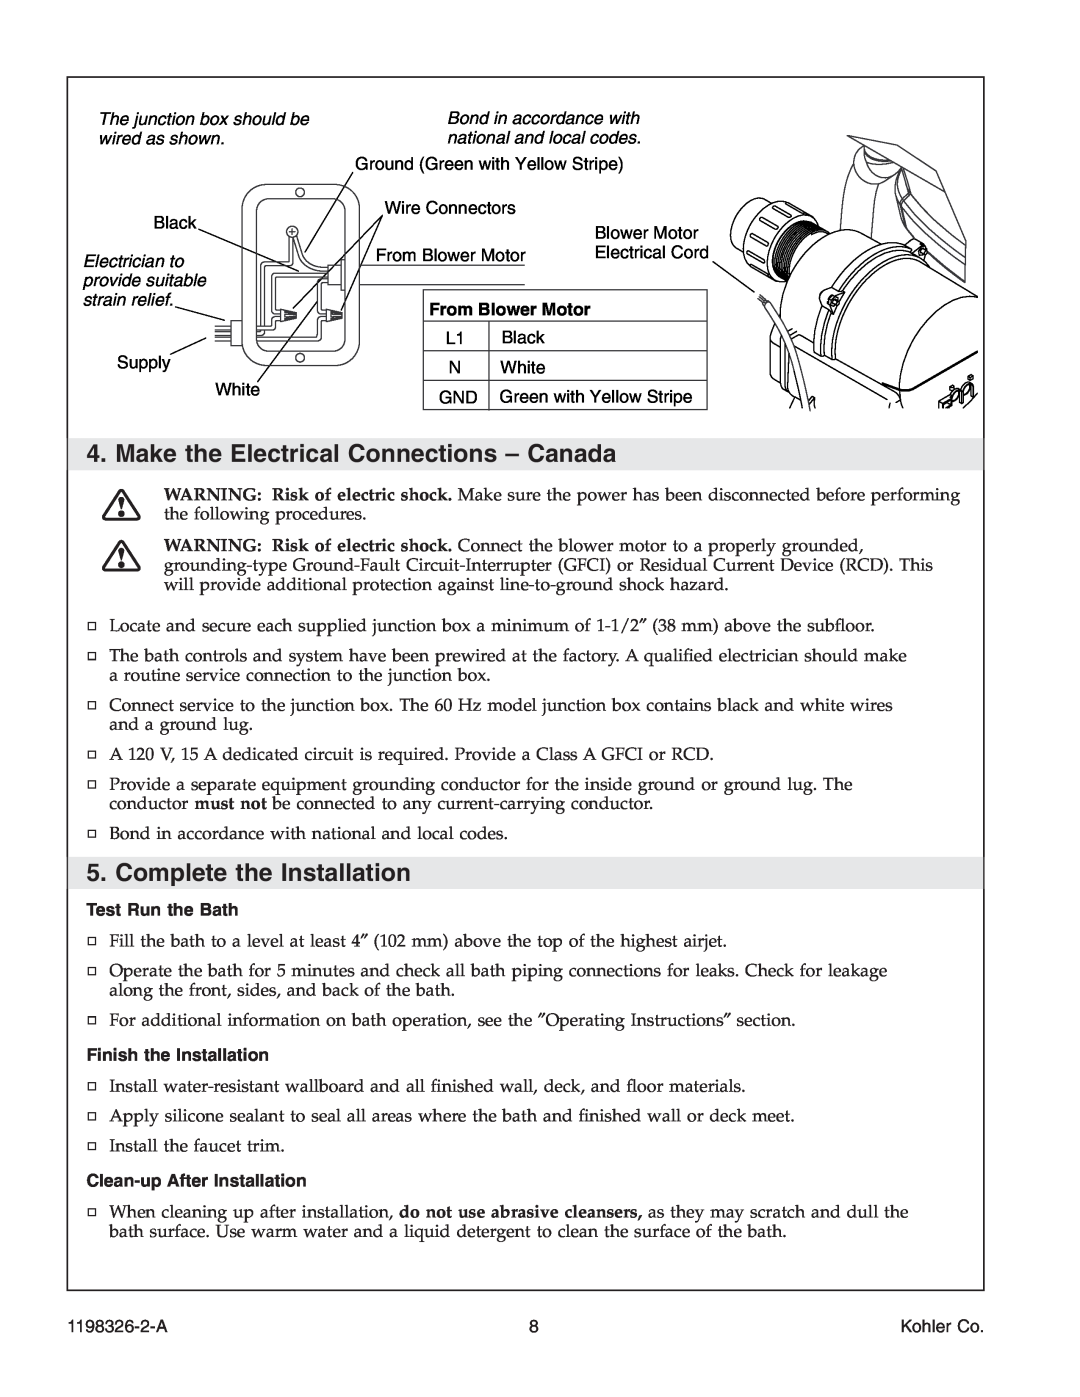 Kohler 1198326-2-A manual Make the Electrical Connections - Canada, Complete the Installation, From Blower Motor, Kohler Co 